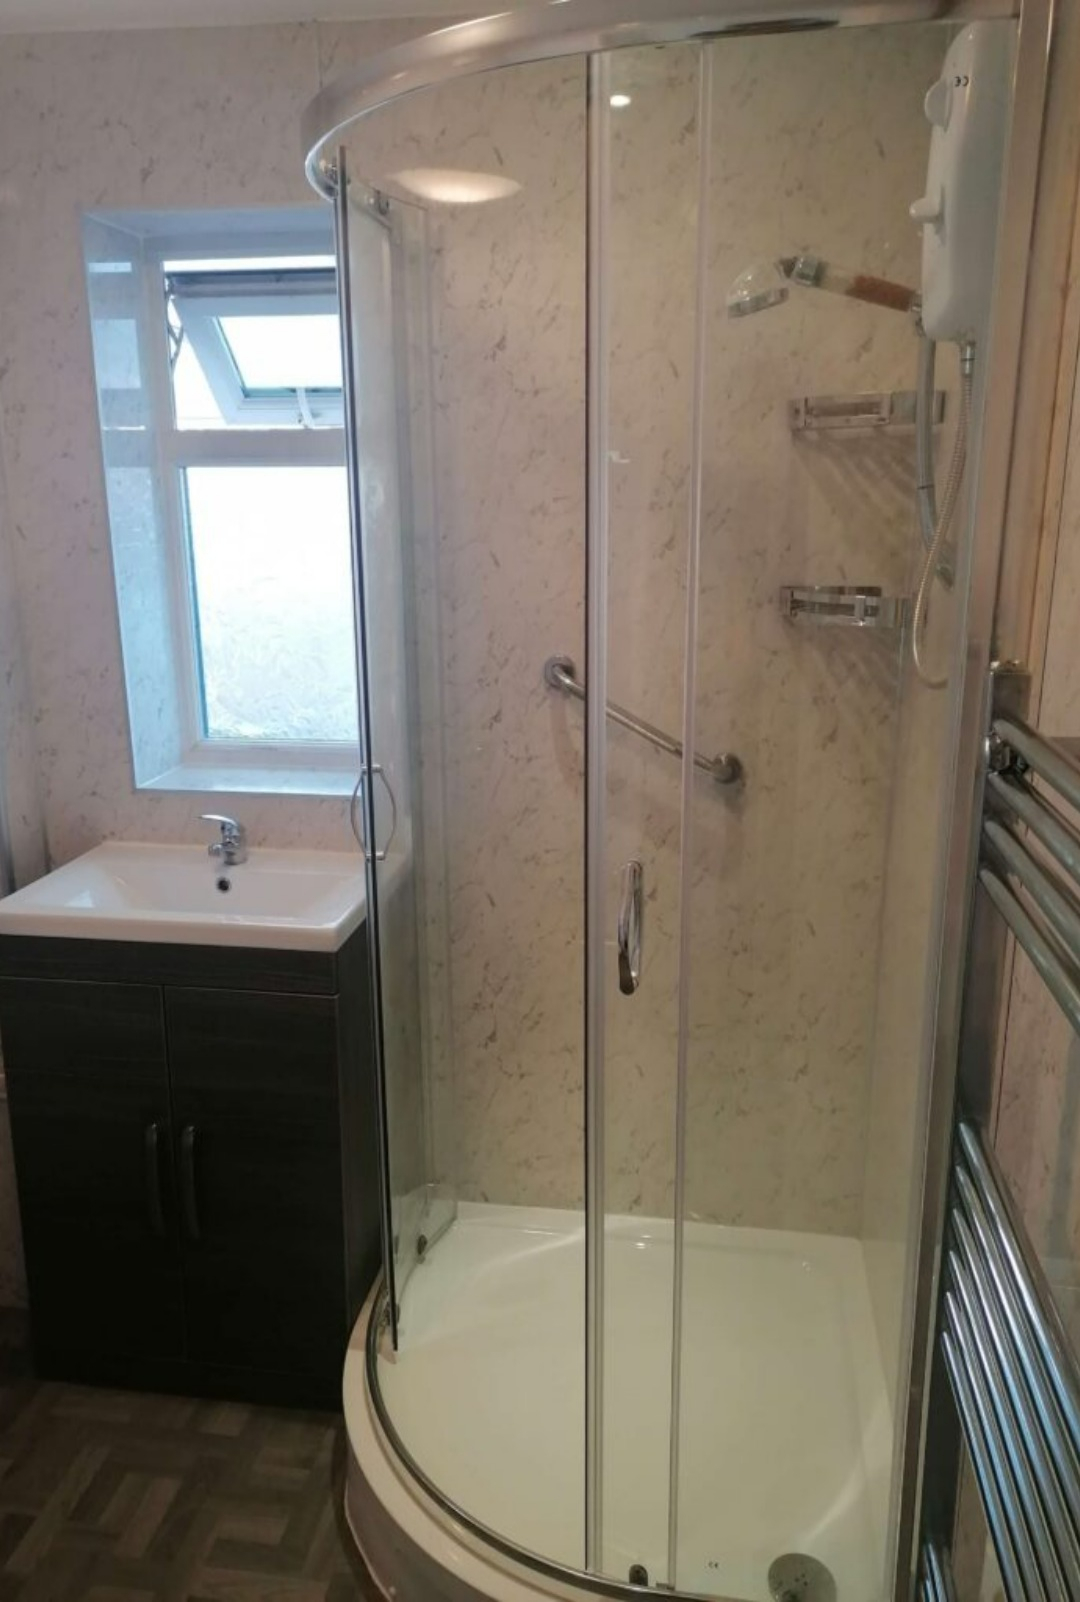 Built in basin storage with curved shower cubicle